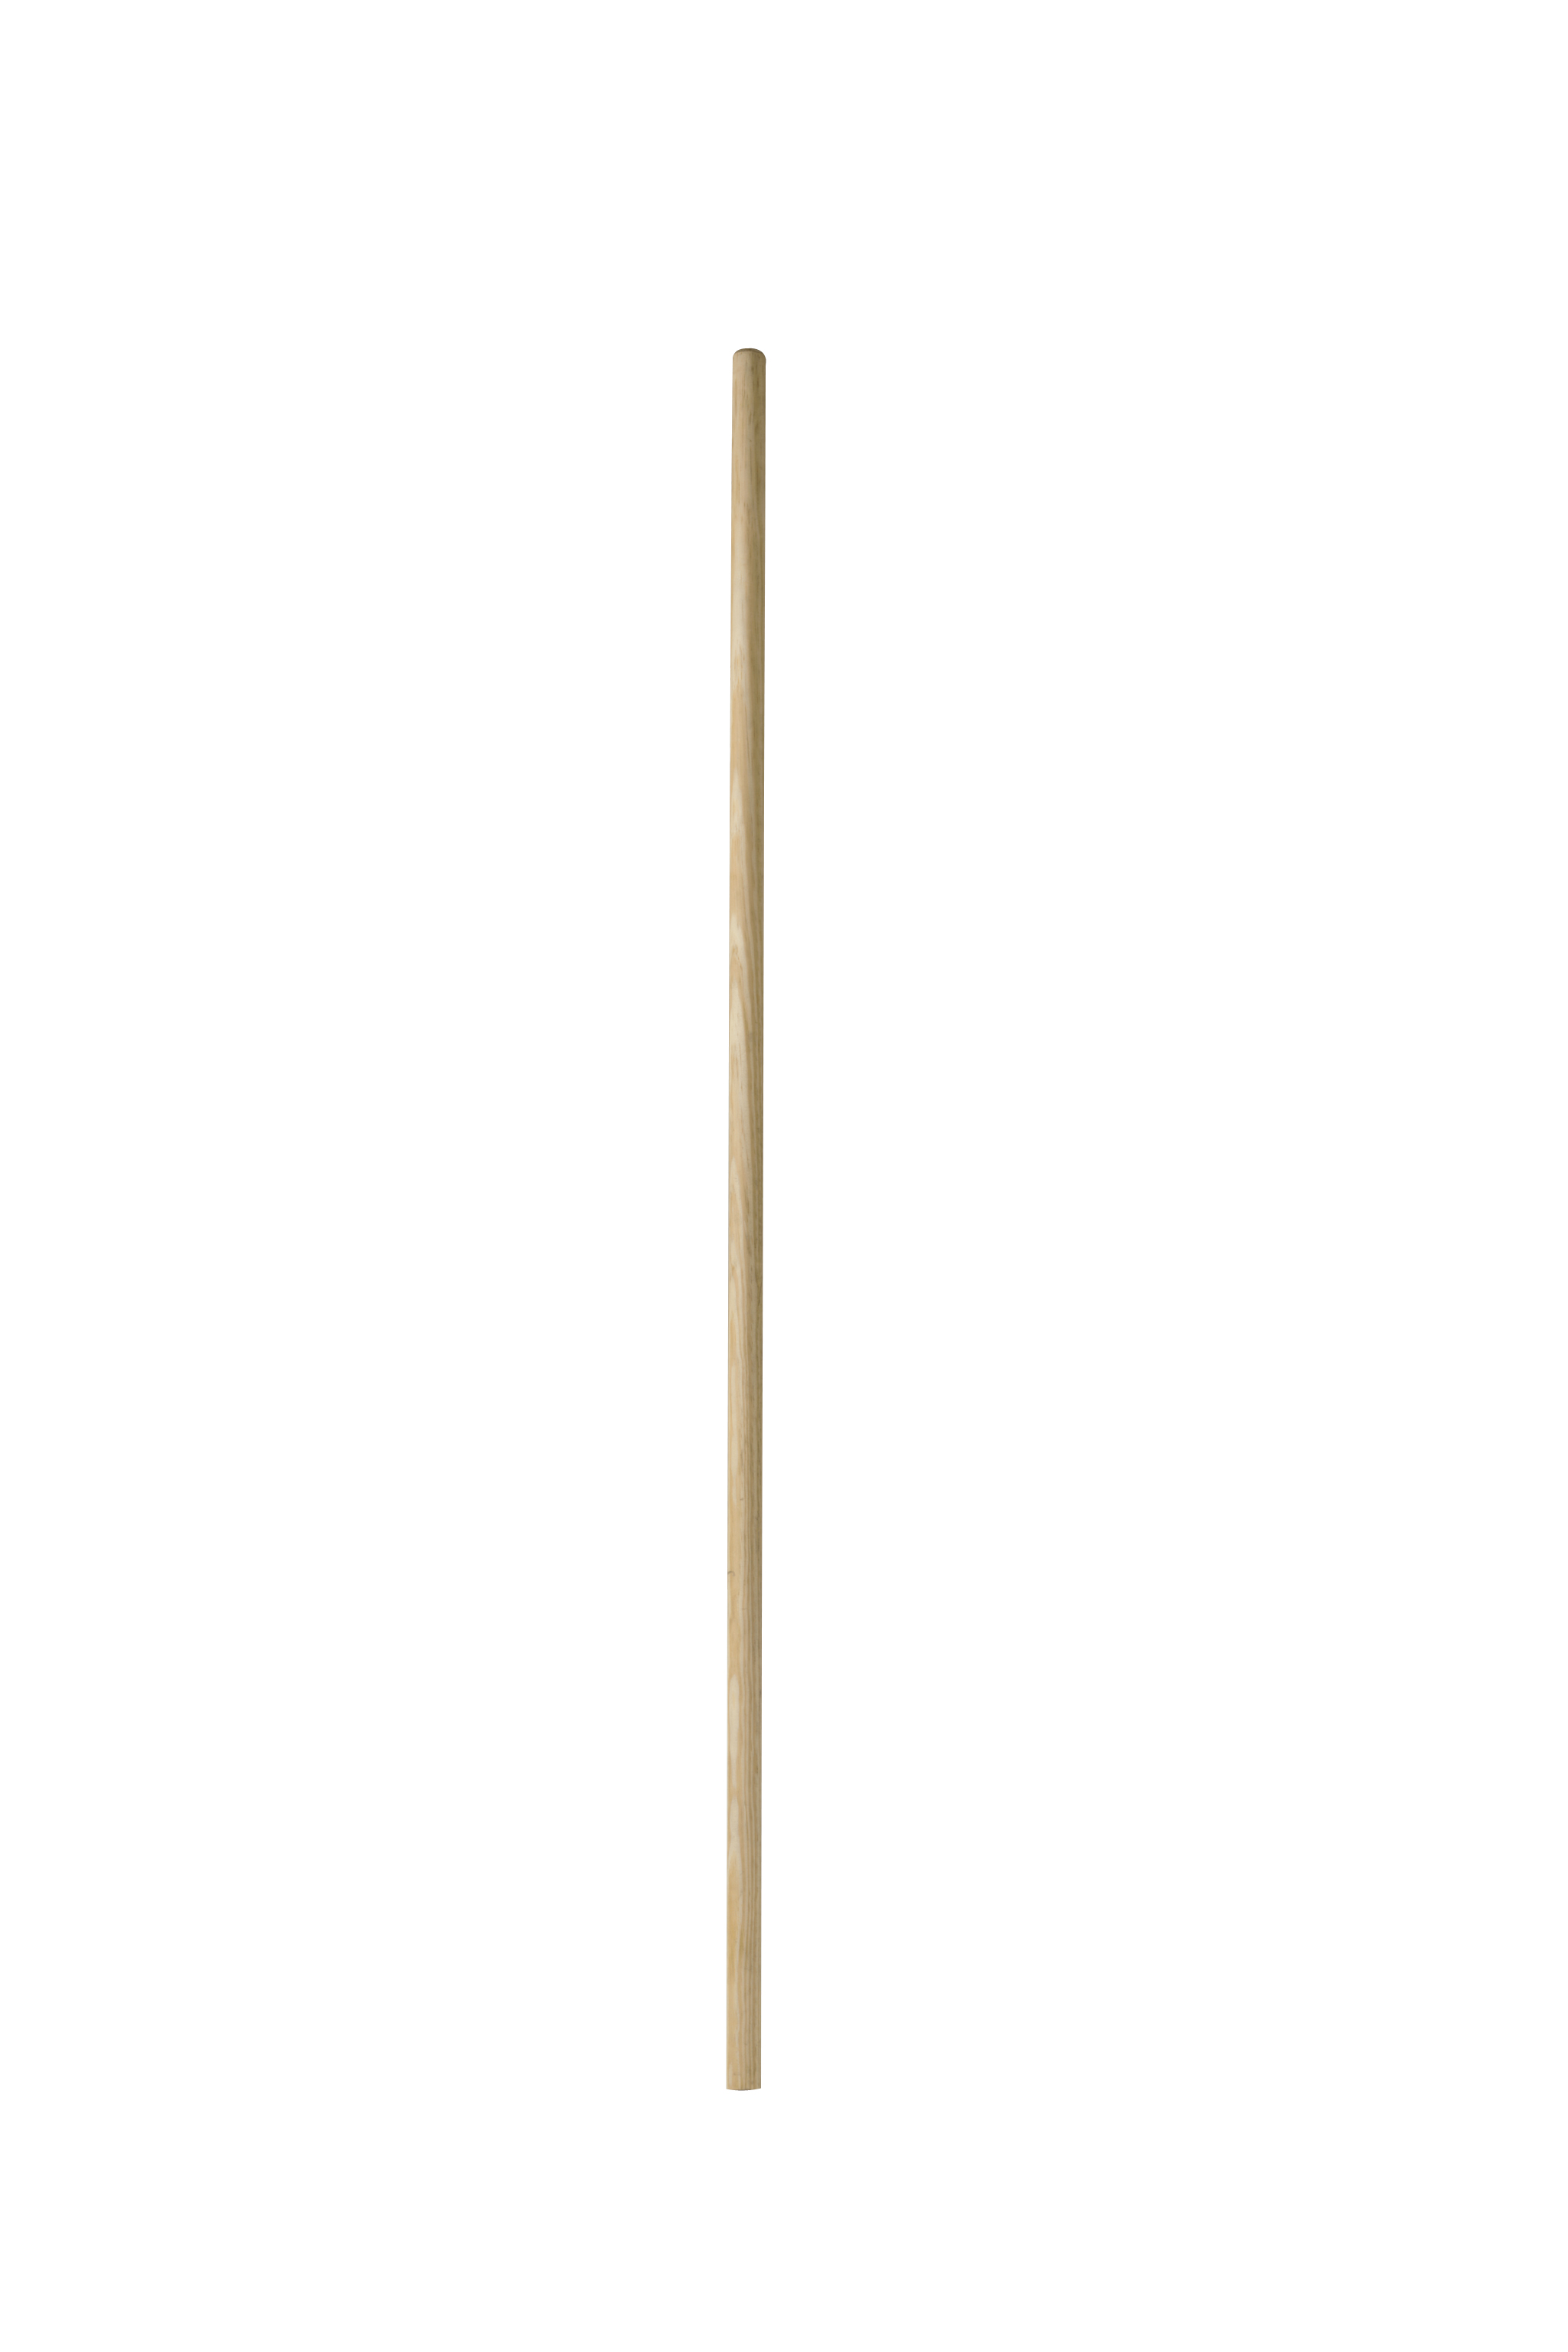 1 1/8 Inch  Wood Handle for Large  Brooms 48 Inch